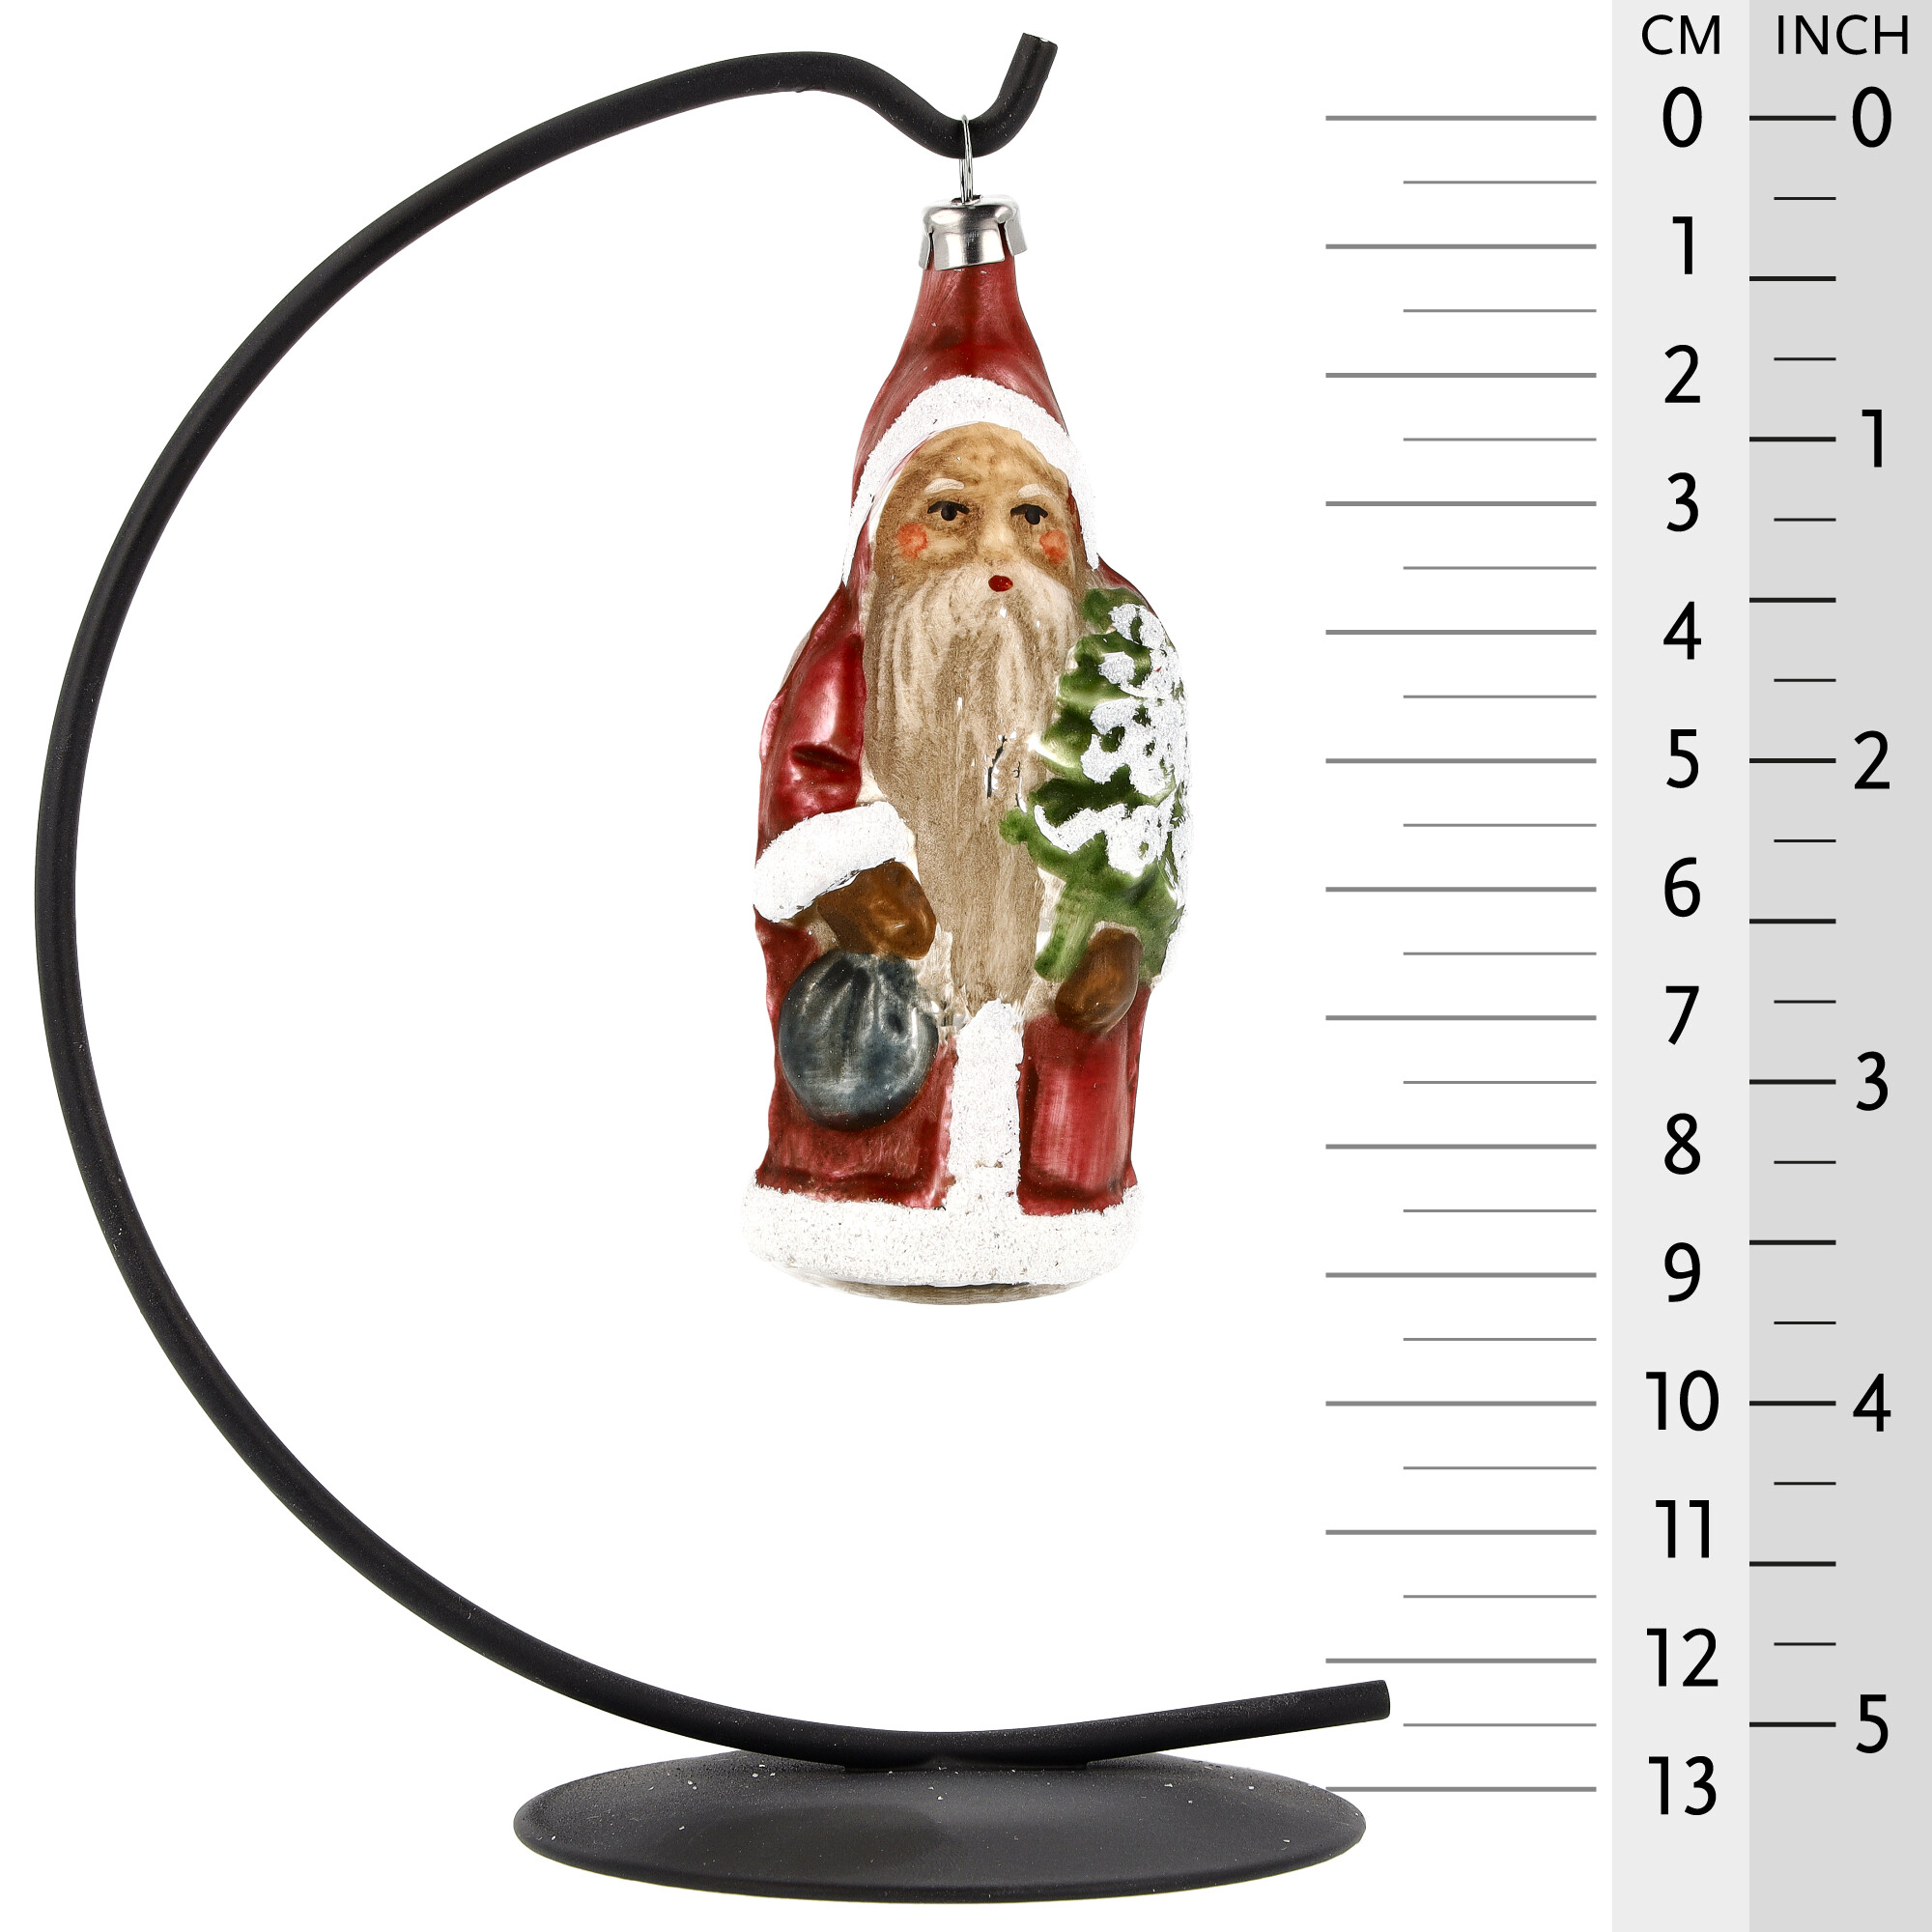 Retro Vintage style Christmas Glass Ornament - Little Santa Claus with backpack and tree